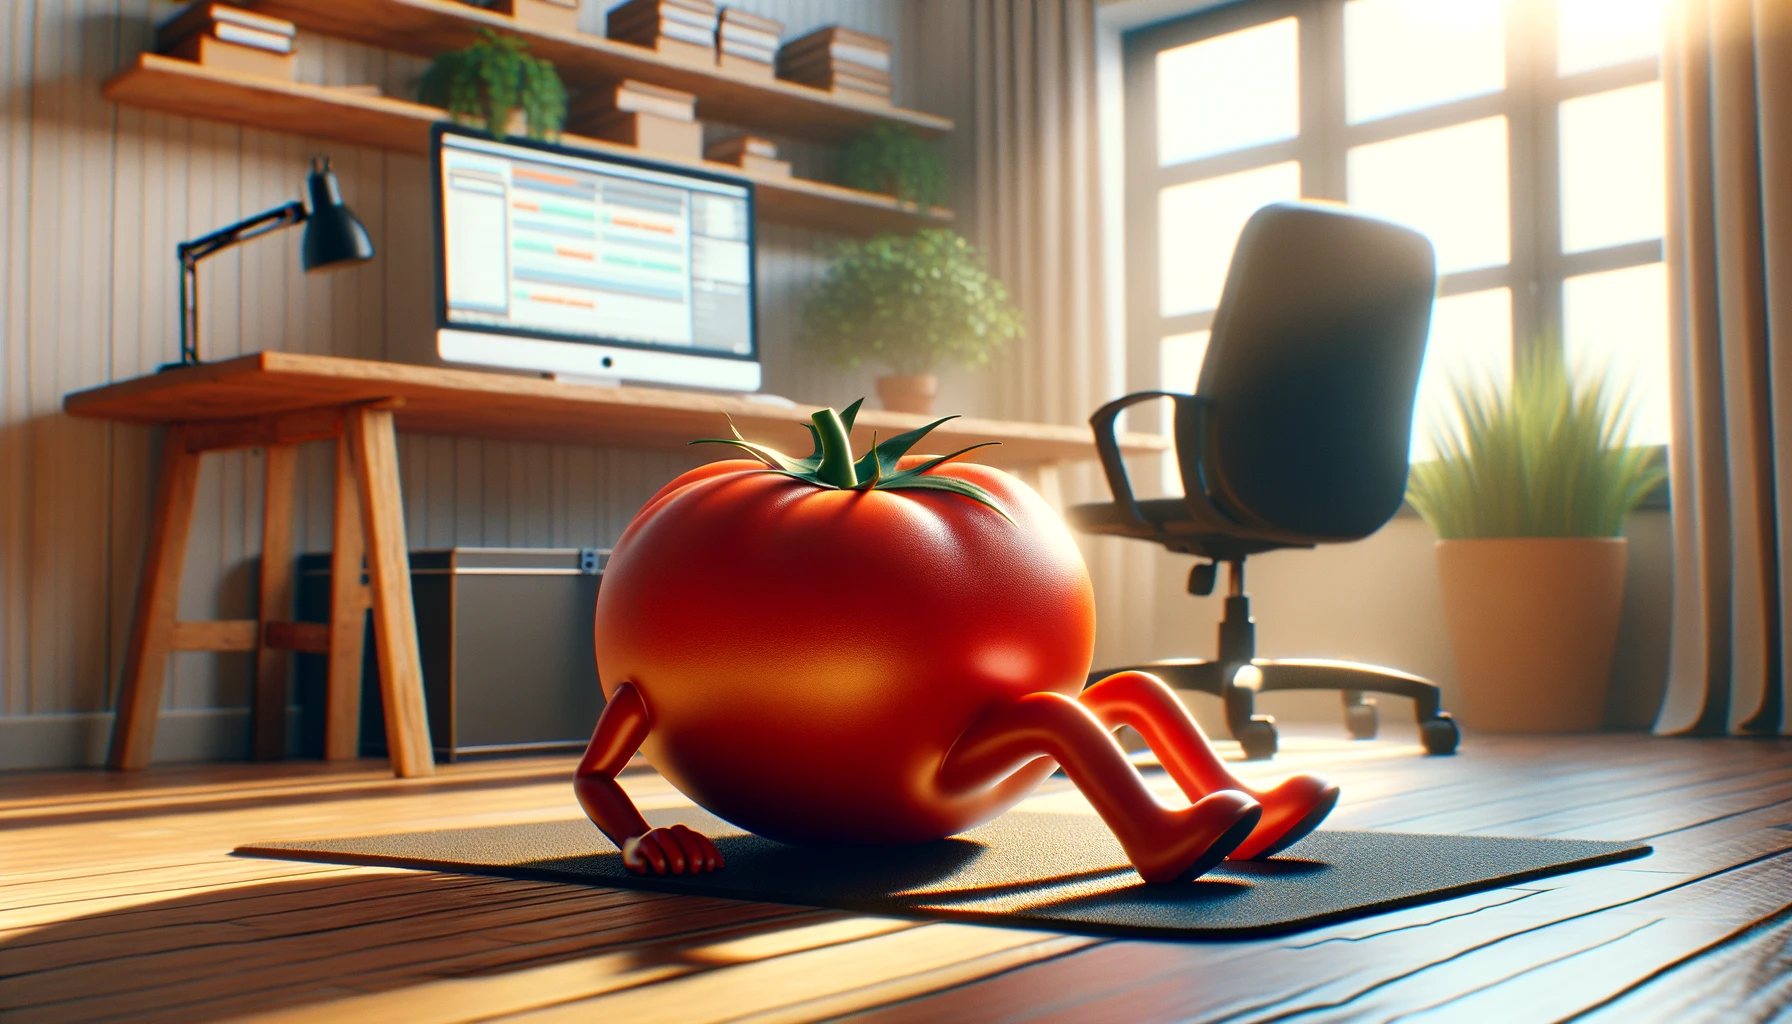 Automato and the Pomodoro Technique: Combating the Health Risks of Prolonged Sitting